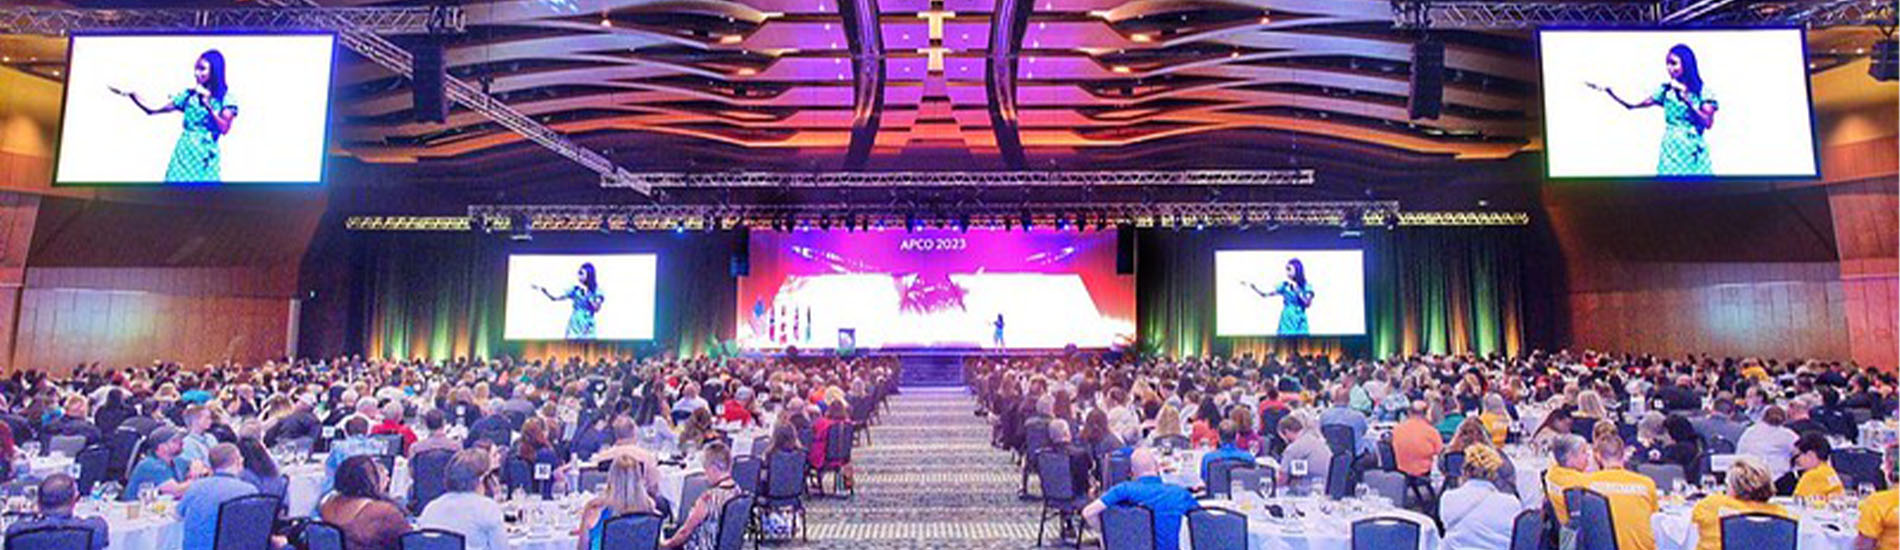 large-conference-room-with-rgb-lighting-and-large-monitors-with-lots-of-people-listening-to-speakers-on-next-gen-9-1-1-technology